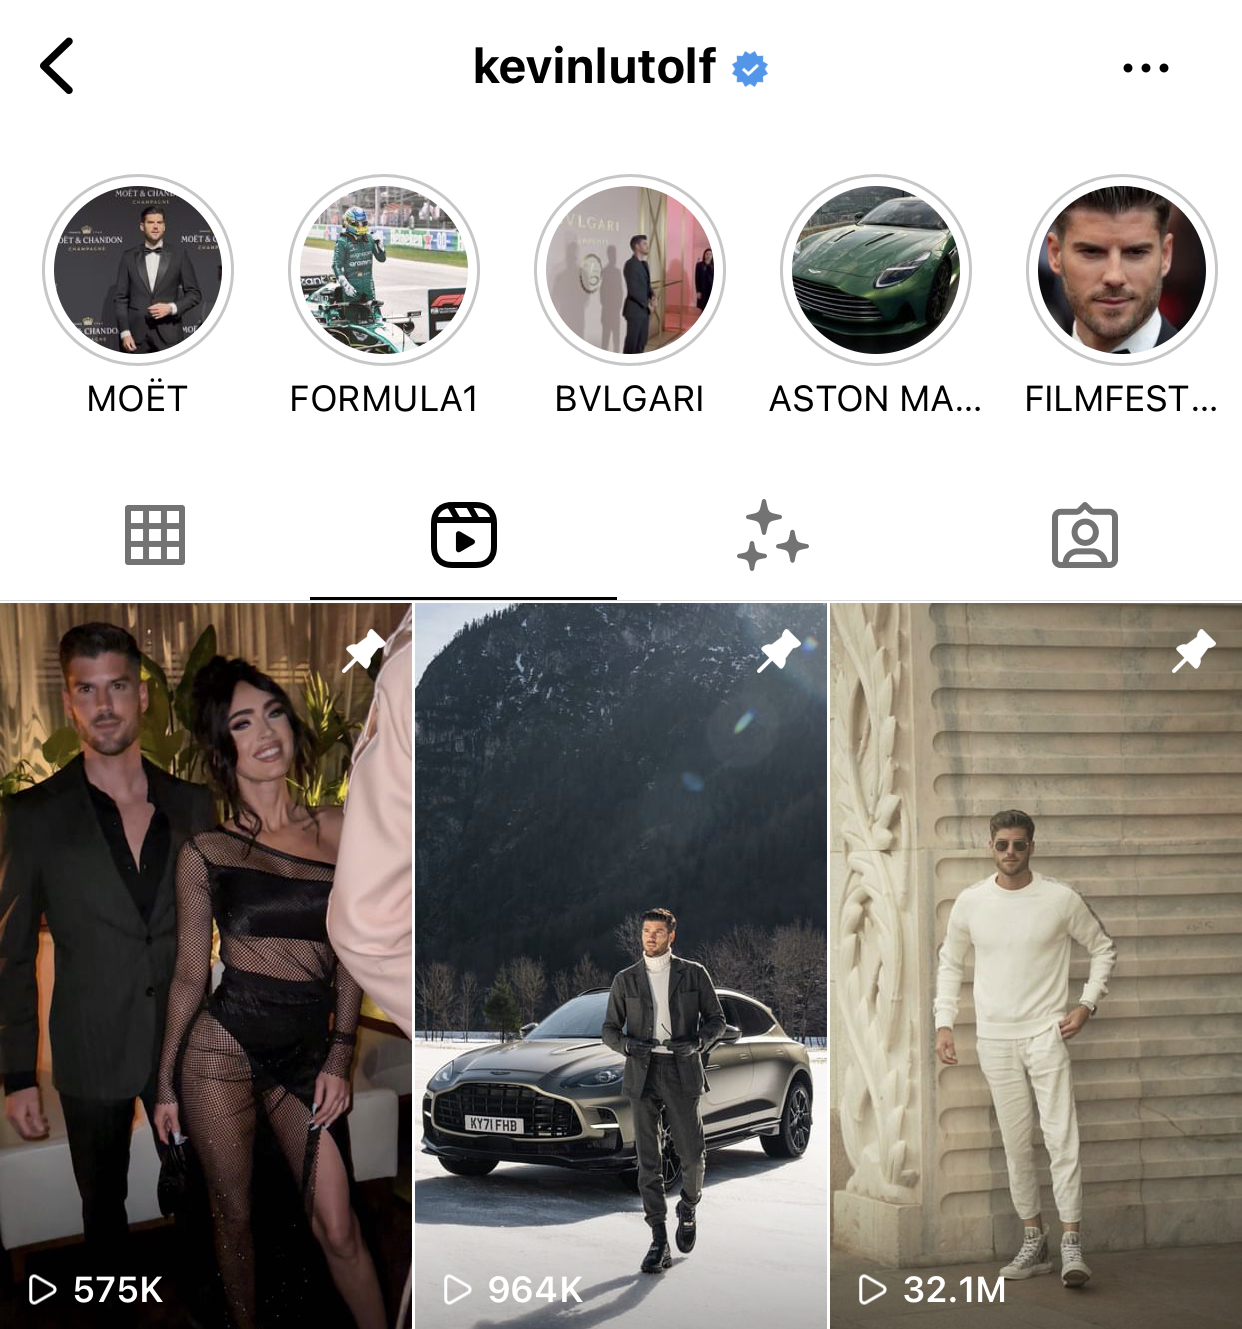 Pinning reels on Instagram make them more accessible to your profile visitors. Pins stay at the top of your profile, offering easy access for viewers. 